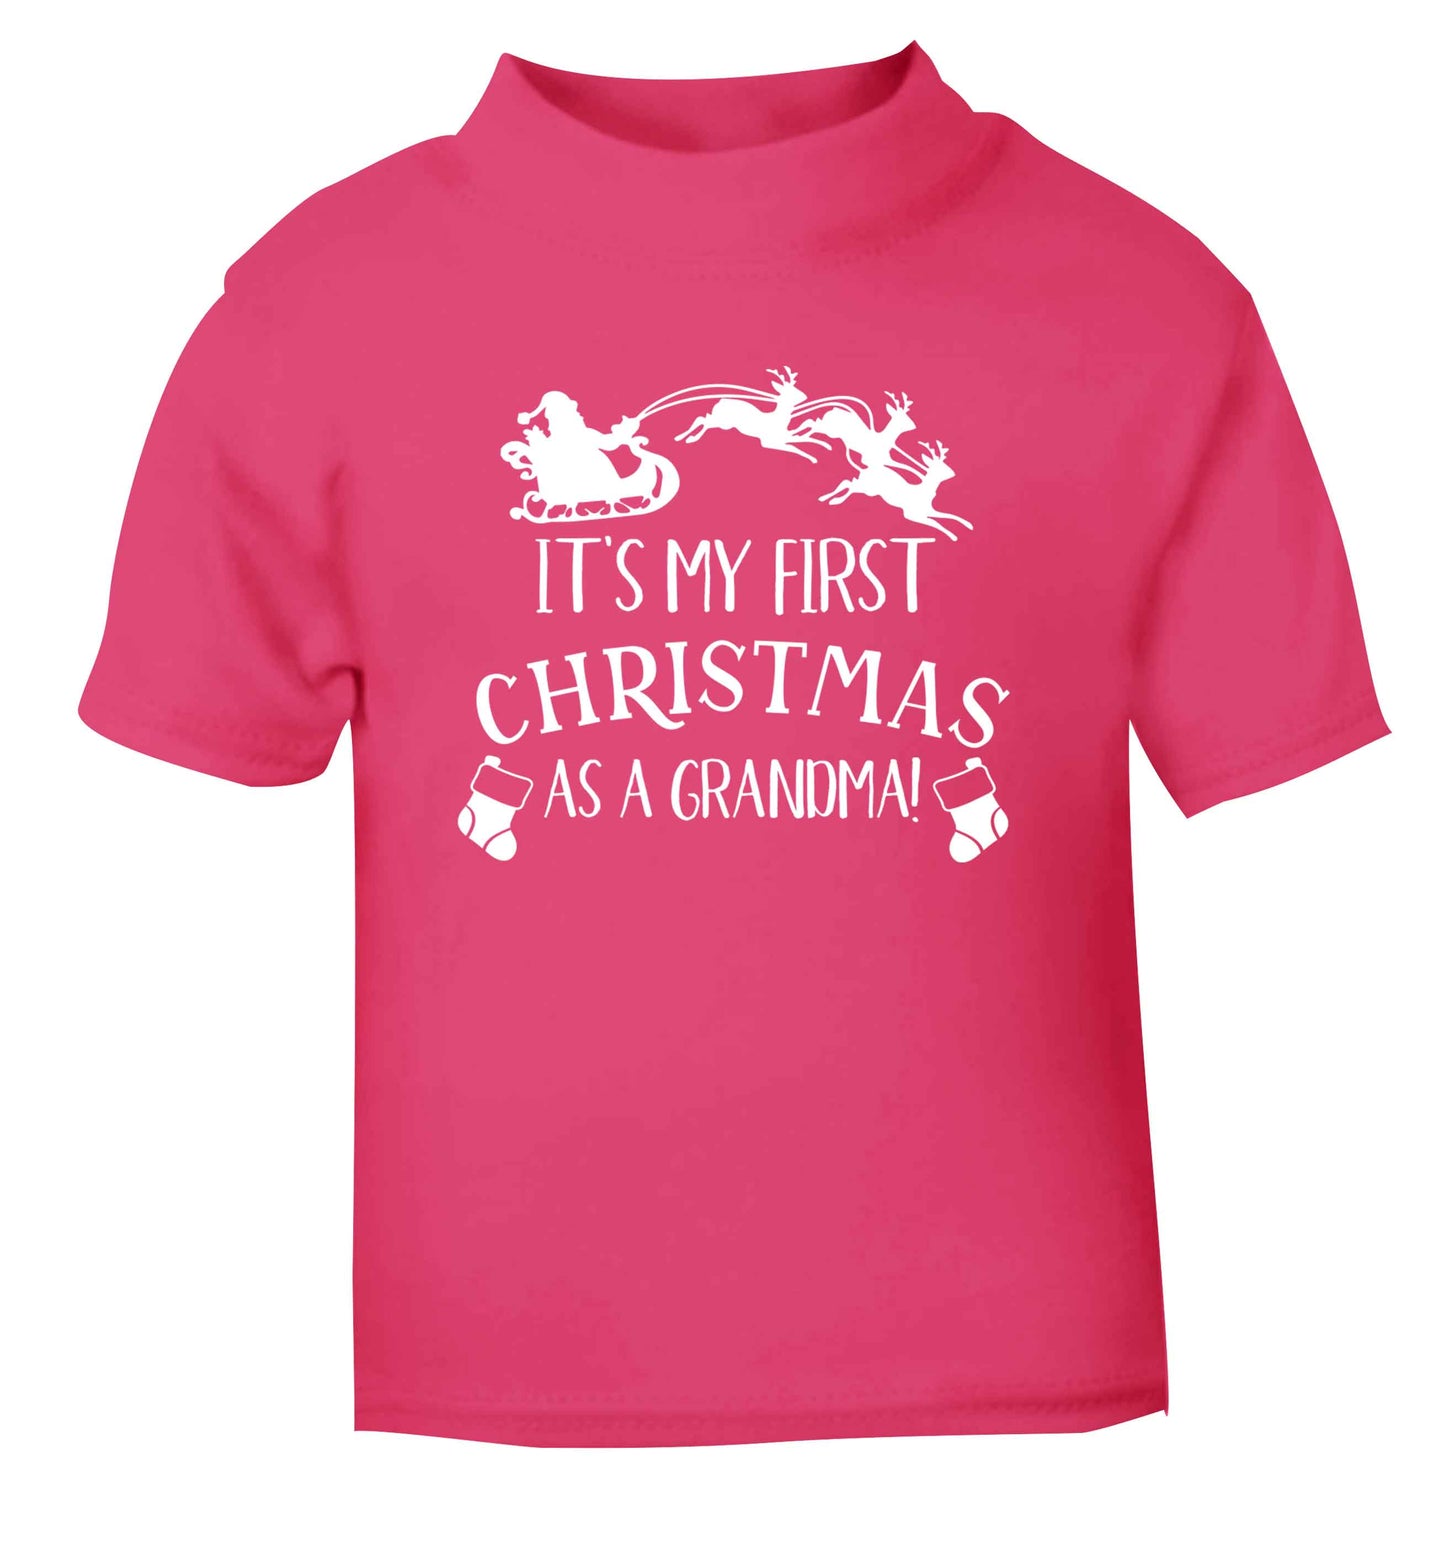 It's my first Christmas as a grandma! pink Baby Toddler Tshirt 2 Years